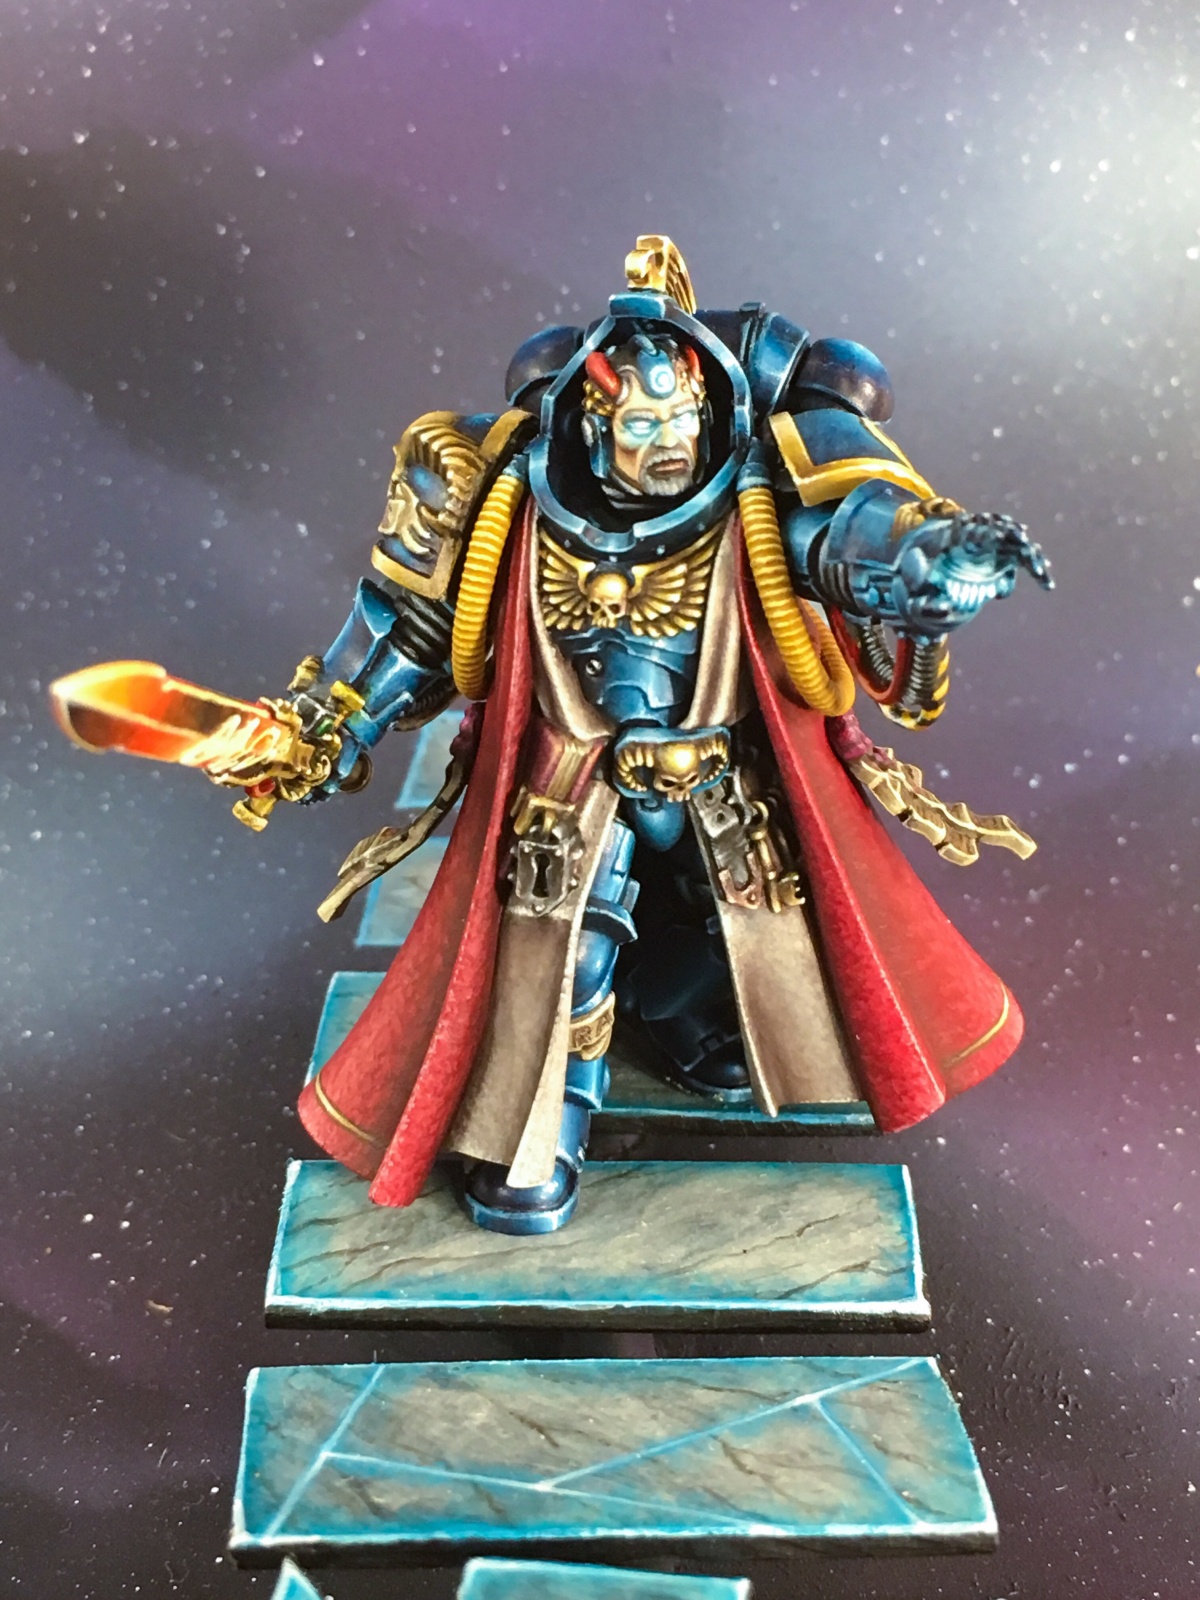 NMM - librarian